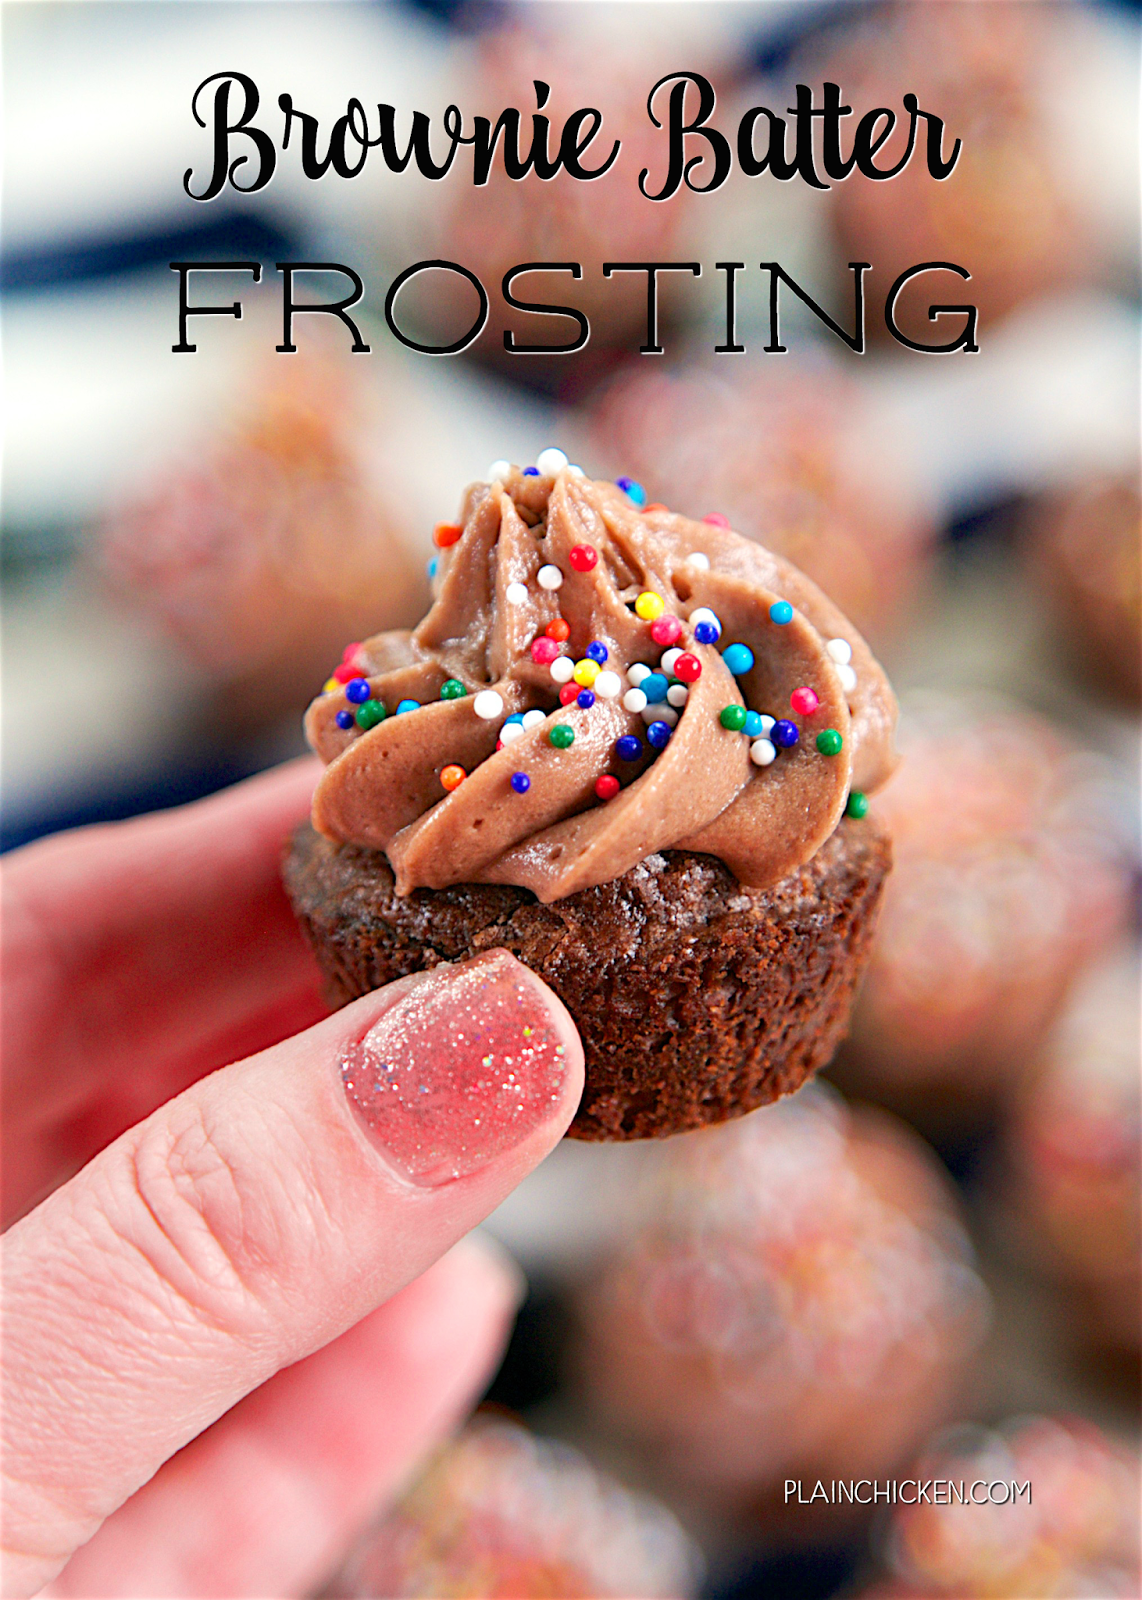 Brownie Batter Frosting - only 4 ingredients to the most AMAZING frosting! Great on brownie bites, cupcakes, cakes or a spoon!! Ready in about 5 minutes. Can refrigerate or freeze for later!